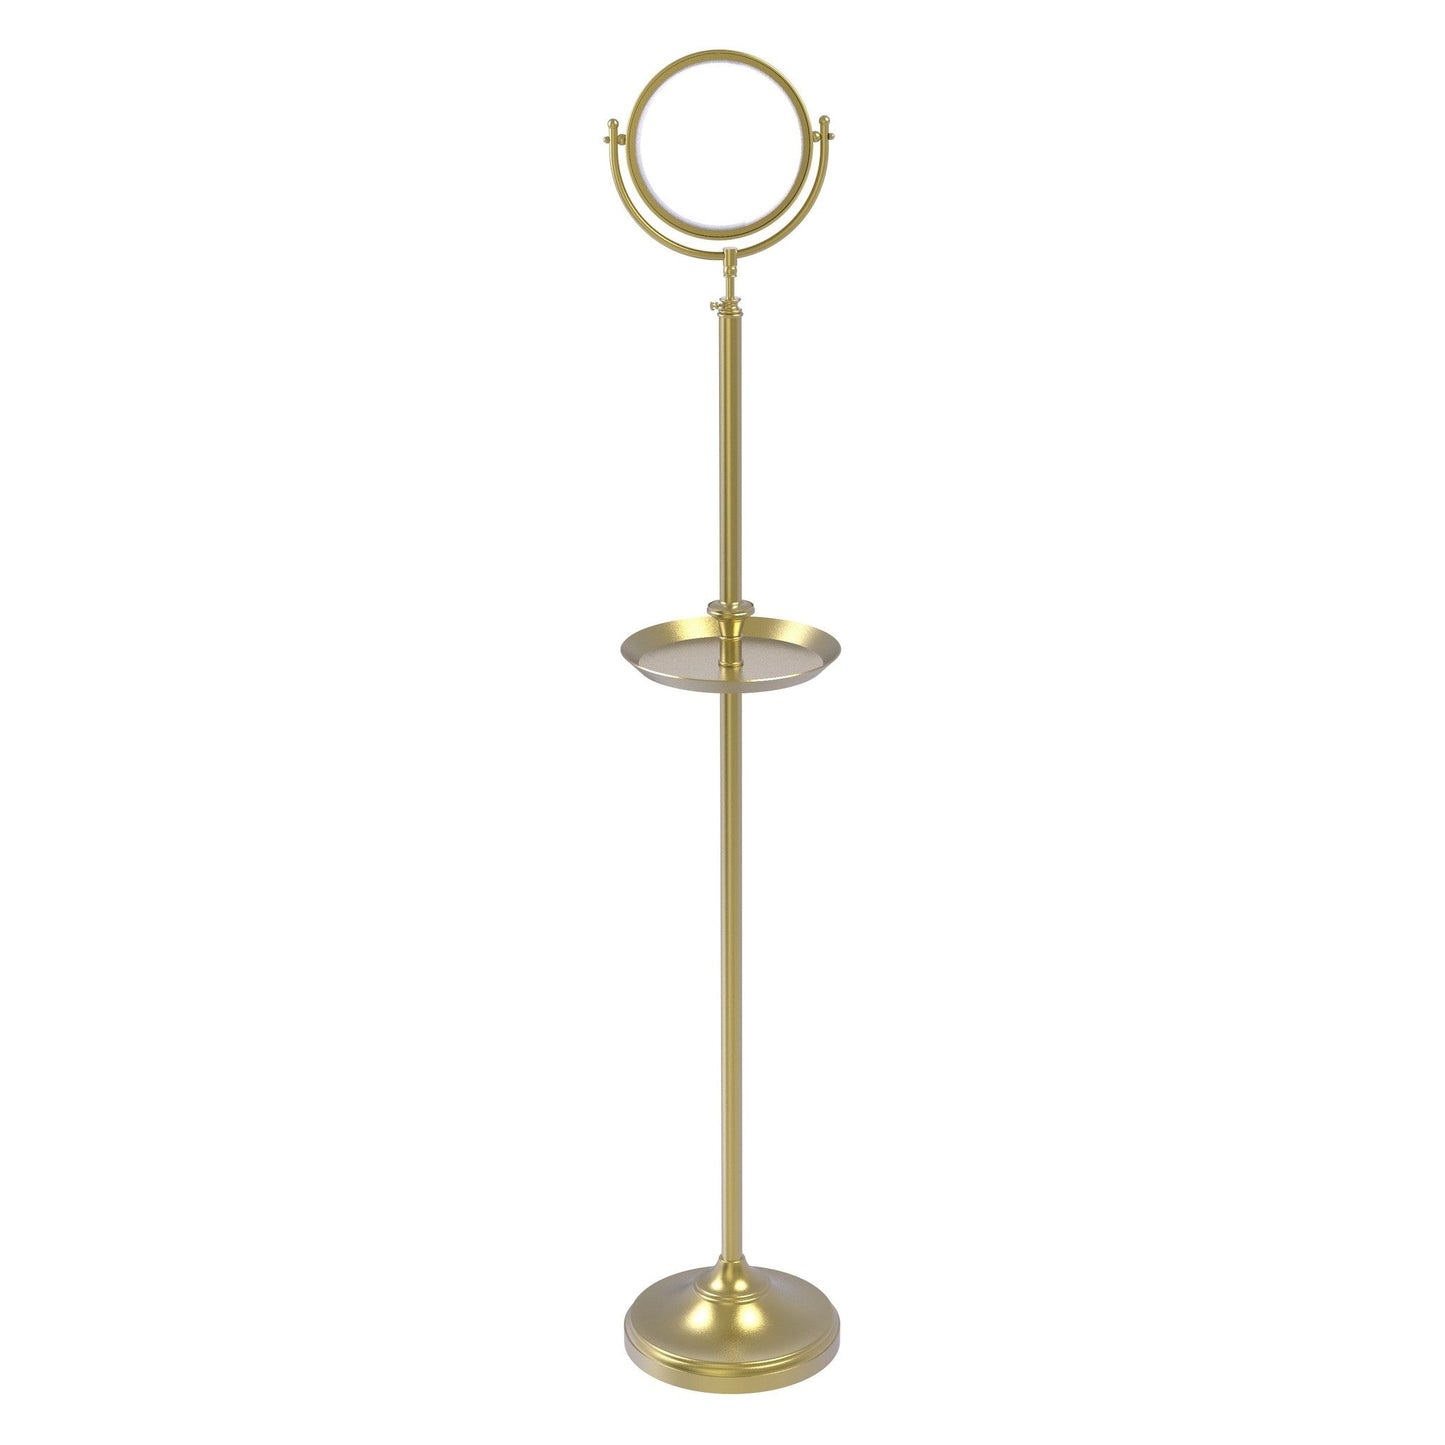 Allied Brass DMF-3/2X 10.5" x 10.5" Satin Brass Solid Brass Floor Standing Make-Up Mirror With 2X Magnification and Shaving Tray